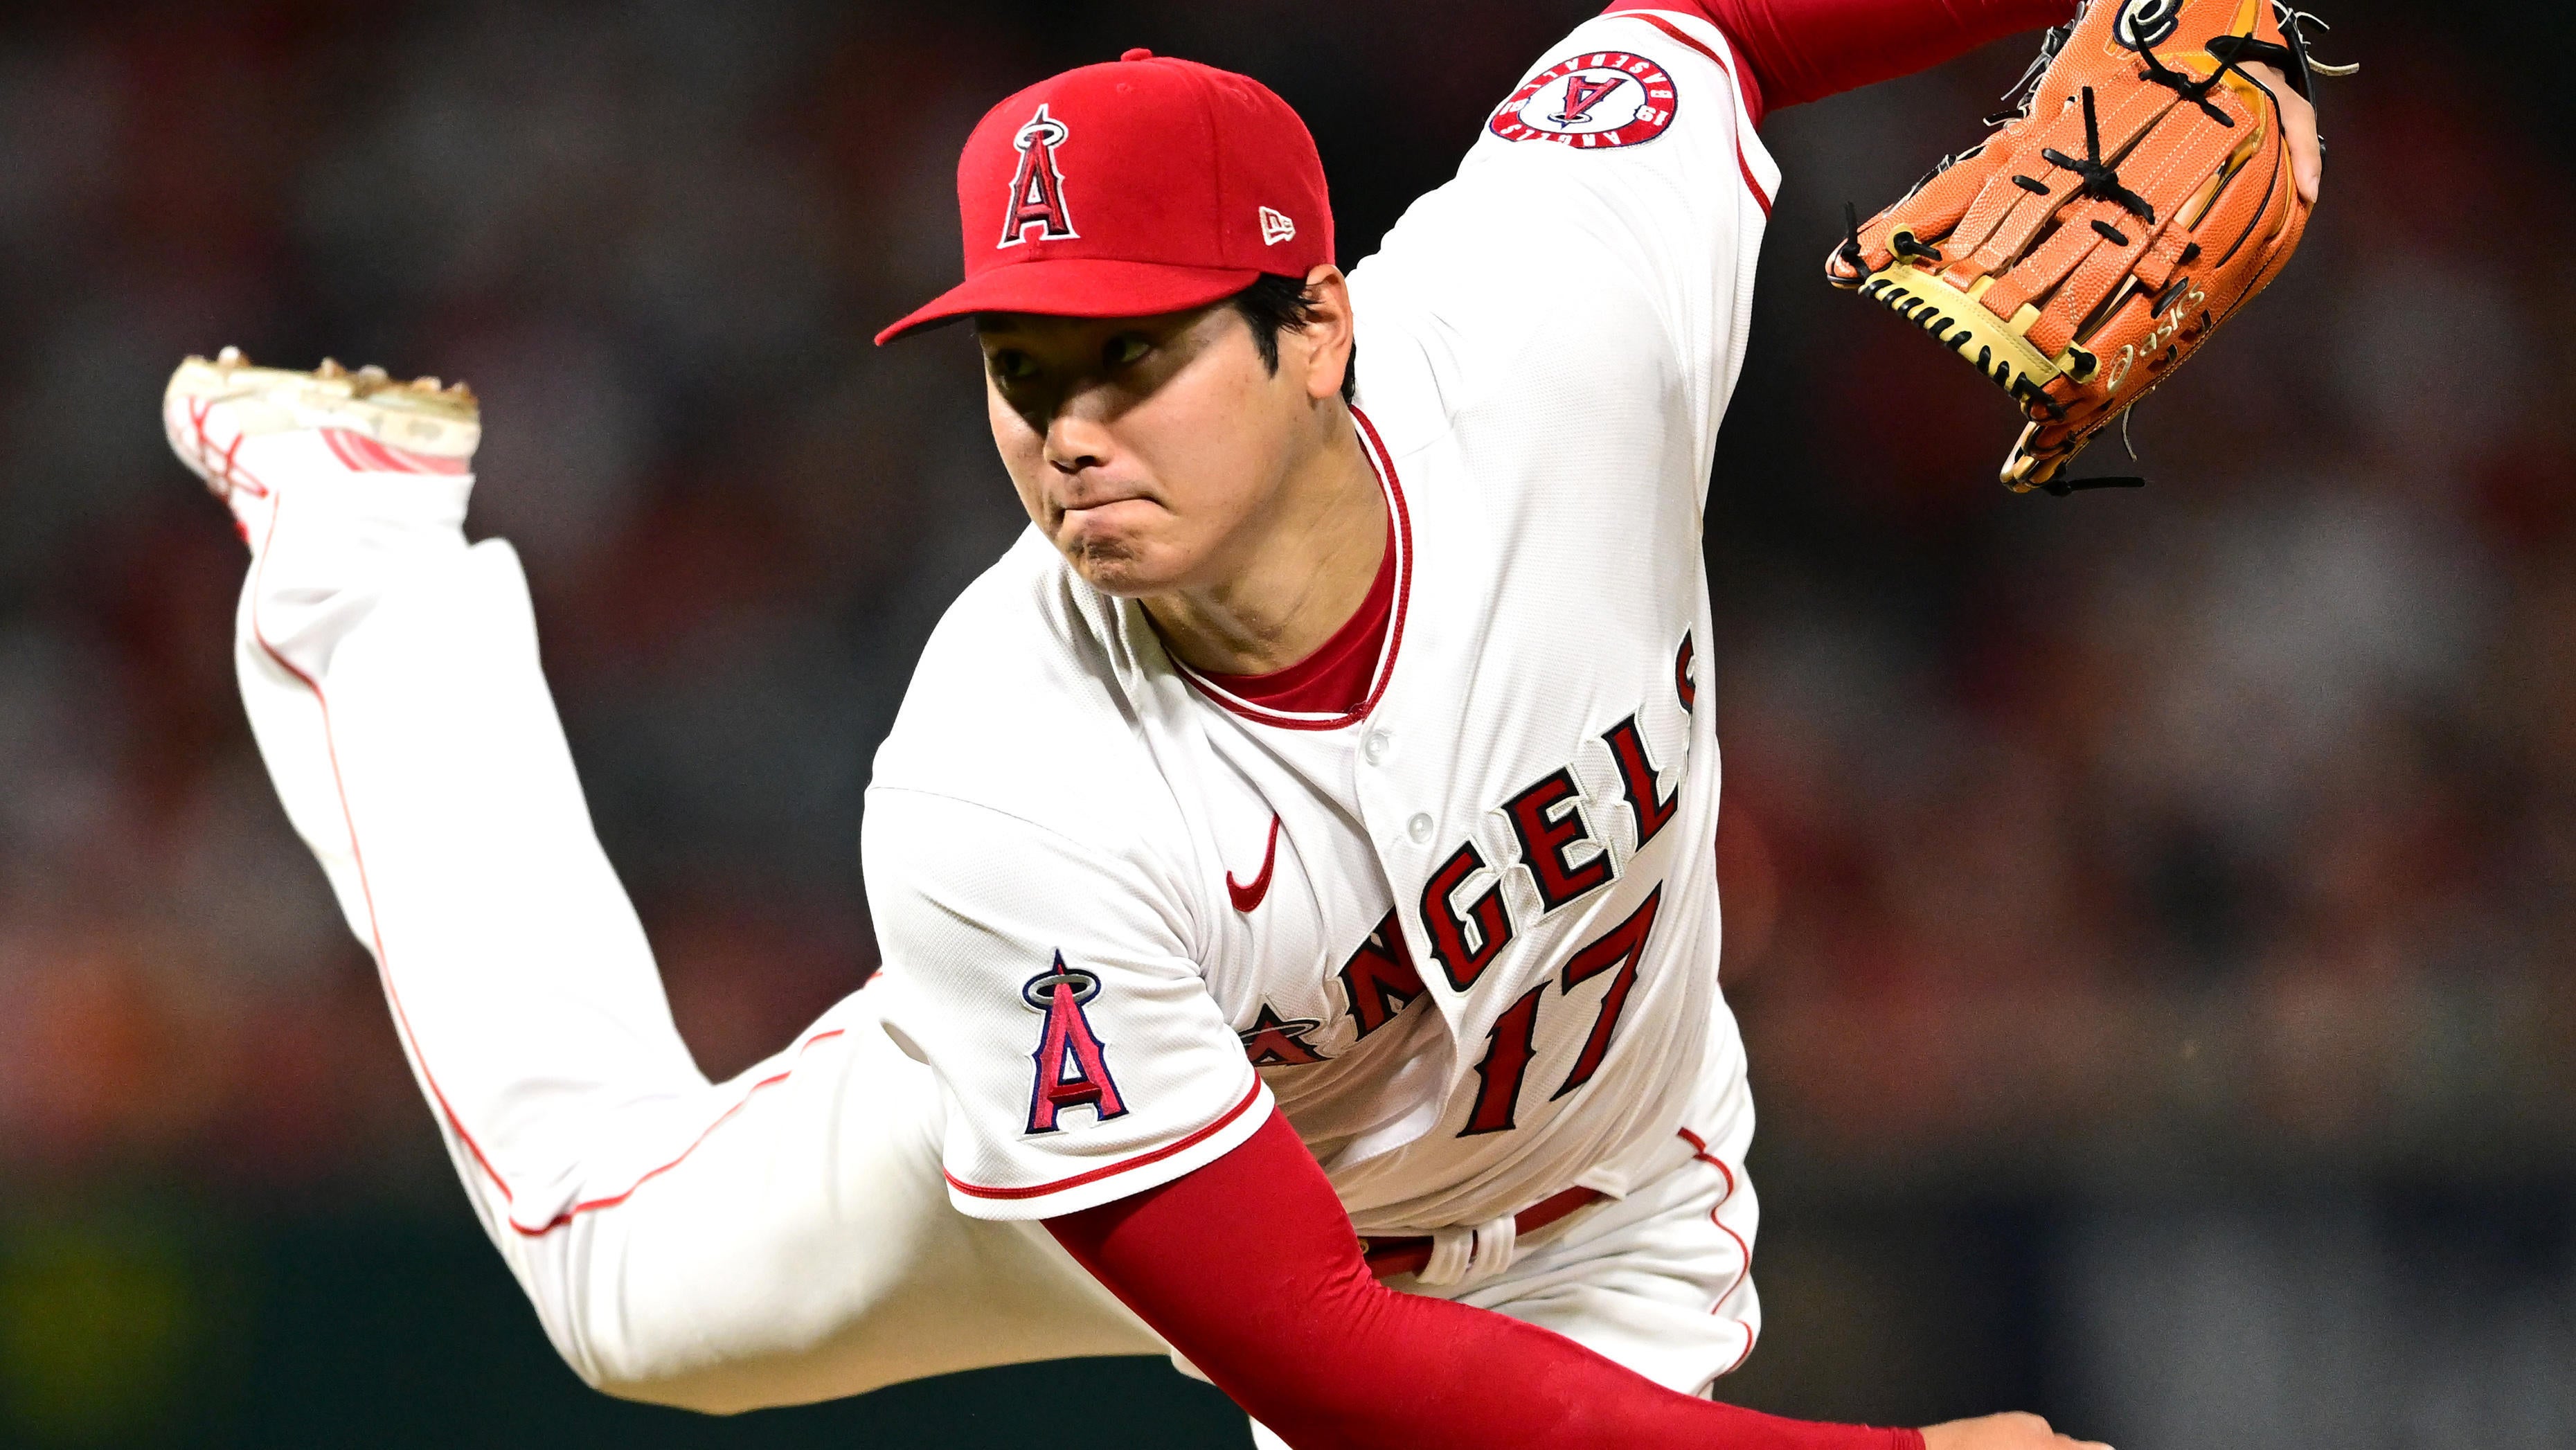 2022 MLB Opening Day takeaways: Shohei Ohtani makes history; D